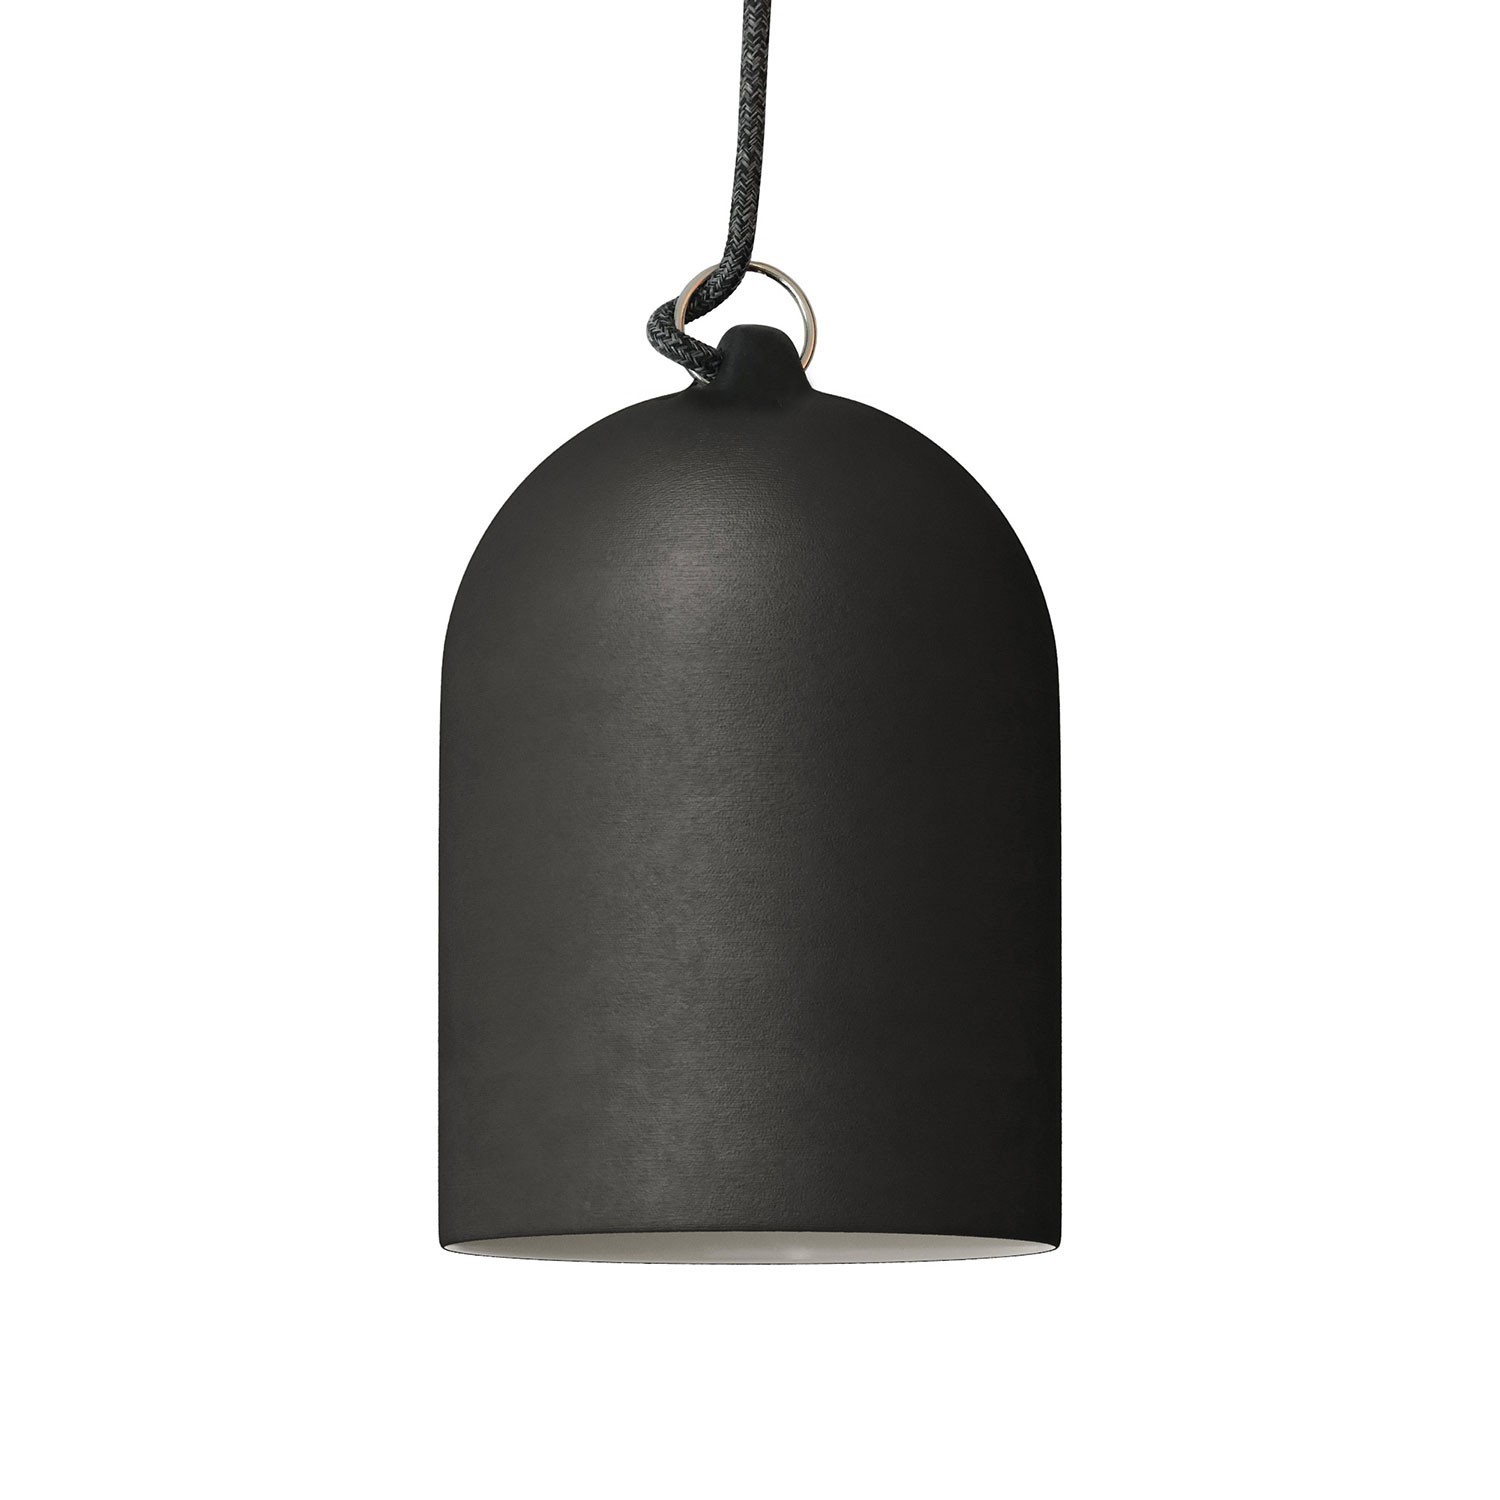 Pendant lamp with textile cable and lampshade Mini Bell XS ceramic shade - Made in Italy